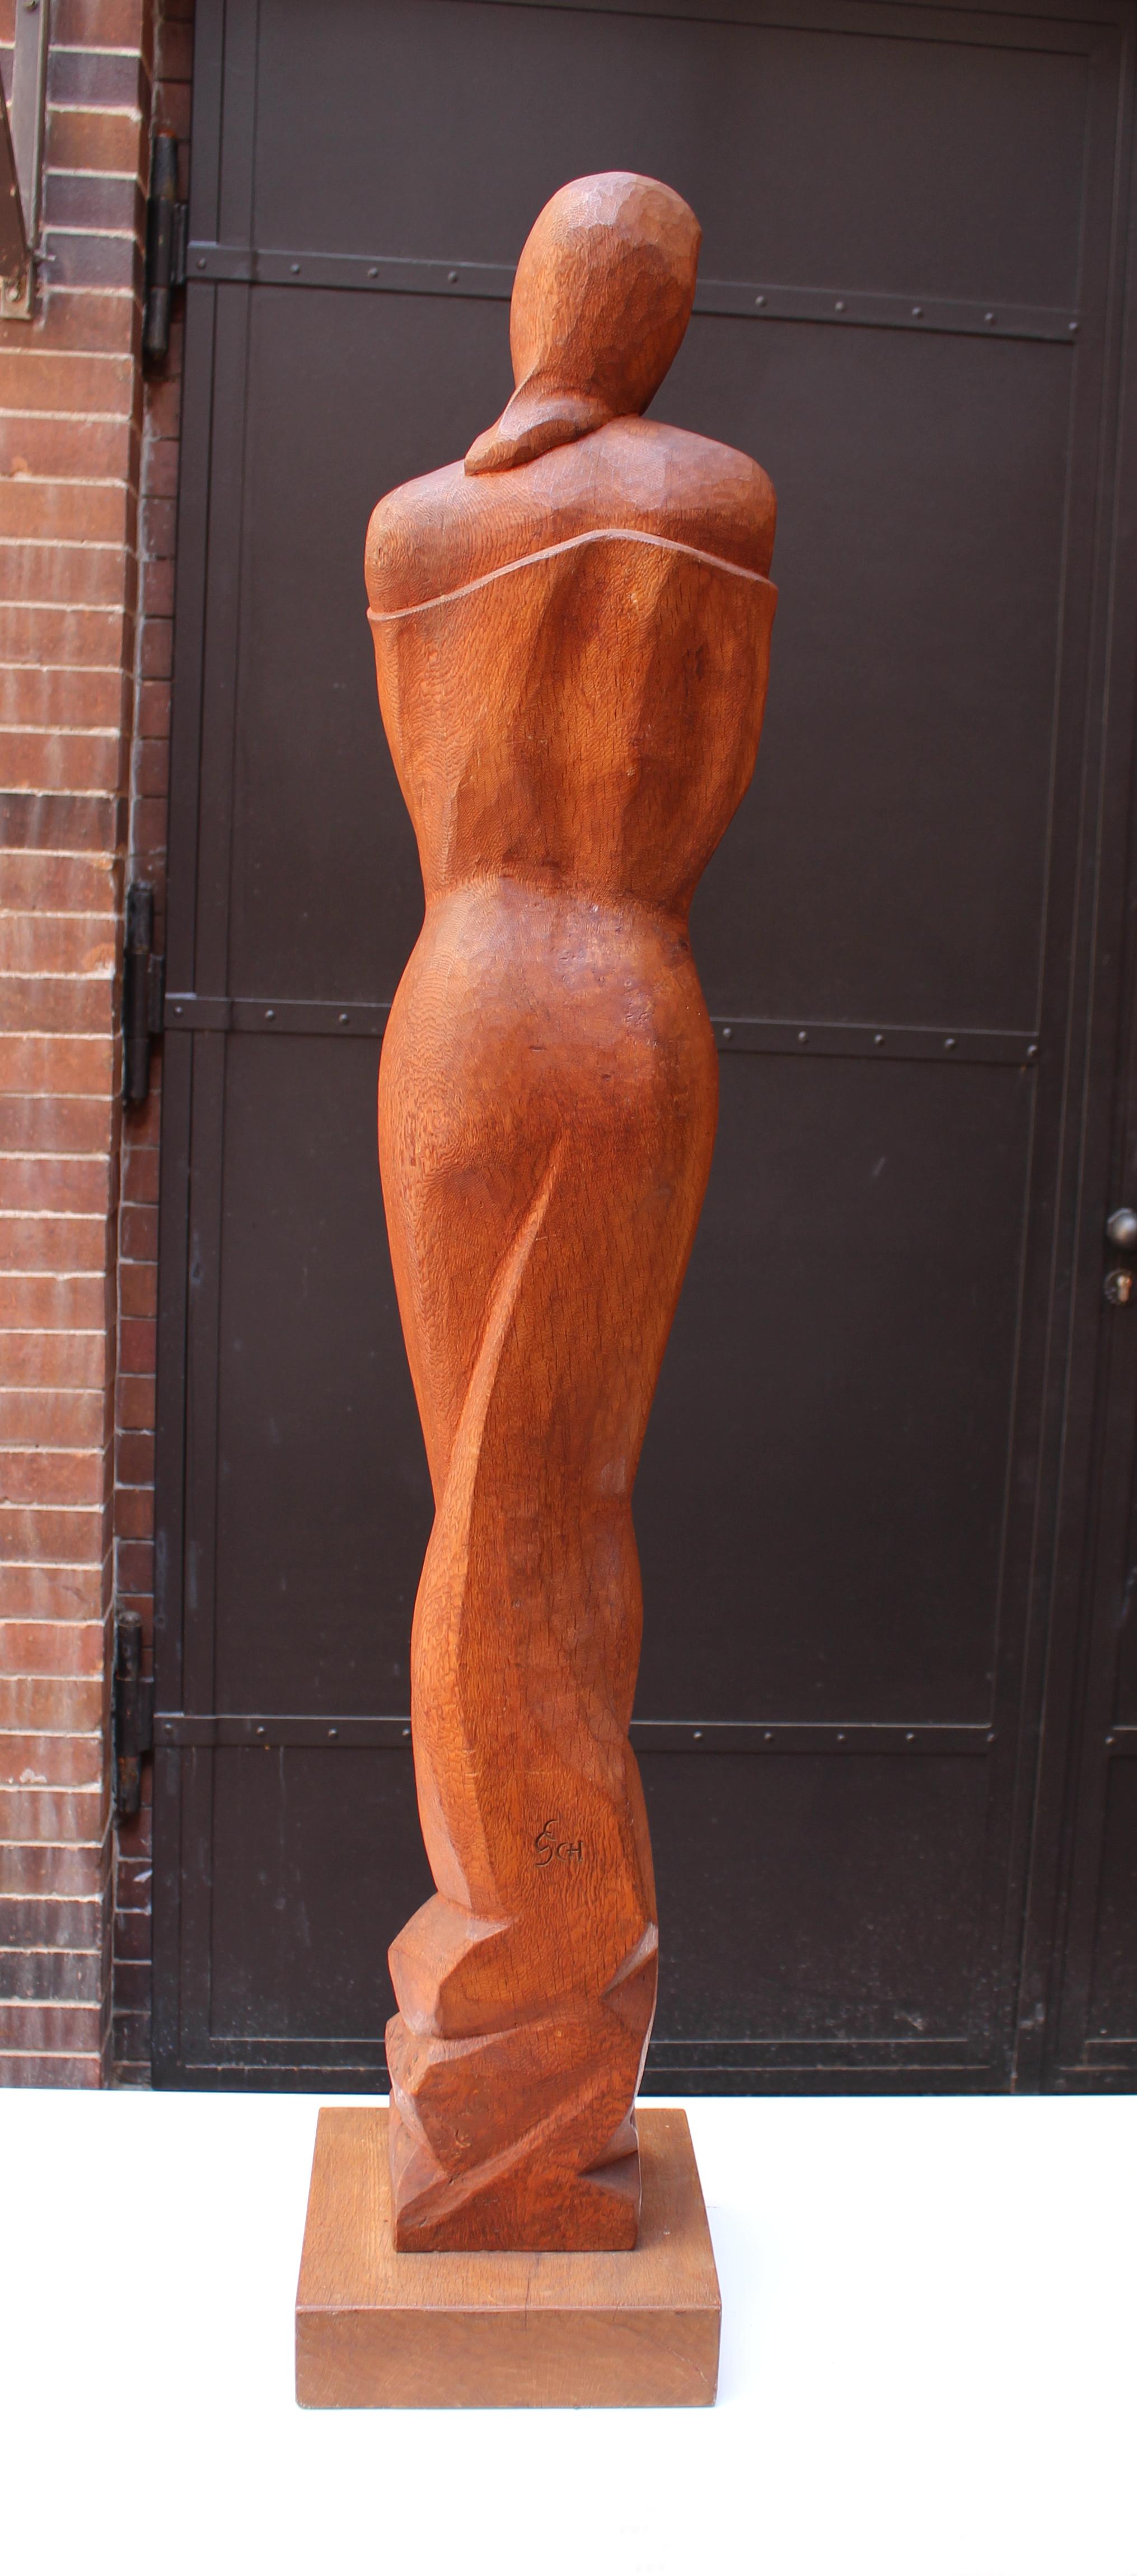 Expressionist Wood Sculpture 1920's - Brown Figurative Sculpture by Unknown